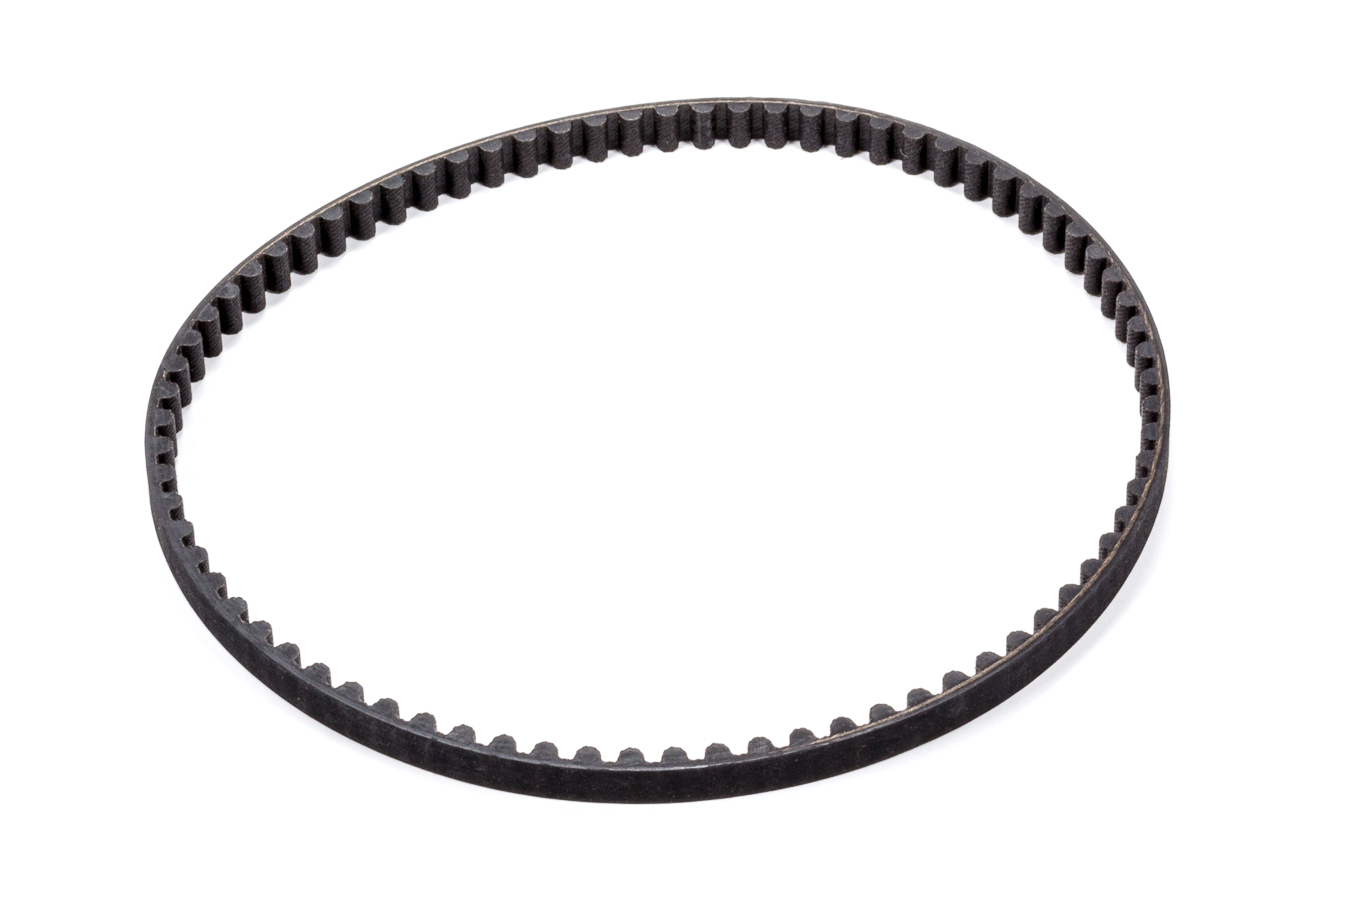 Jones Racing Products 608-10HD HTD Drive Belt, 23.940 in Long, 10 mm Wide, 8 mm Pitch, Each